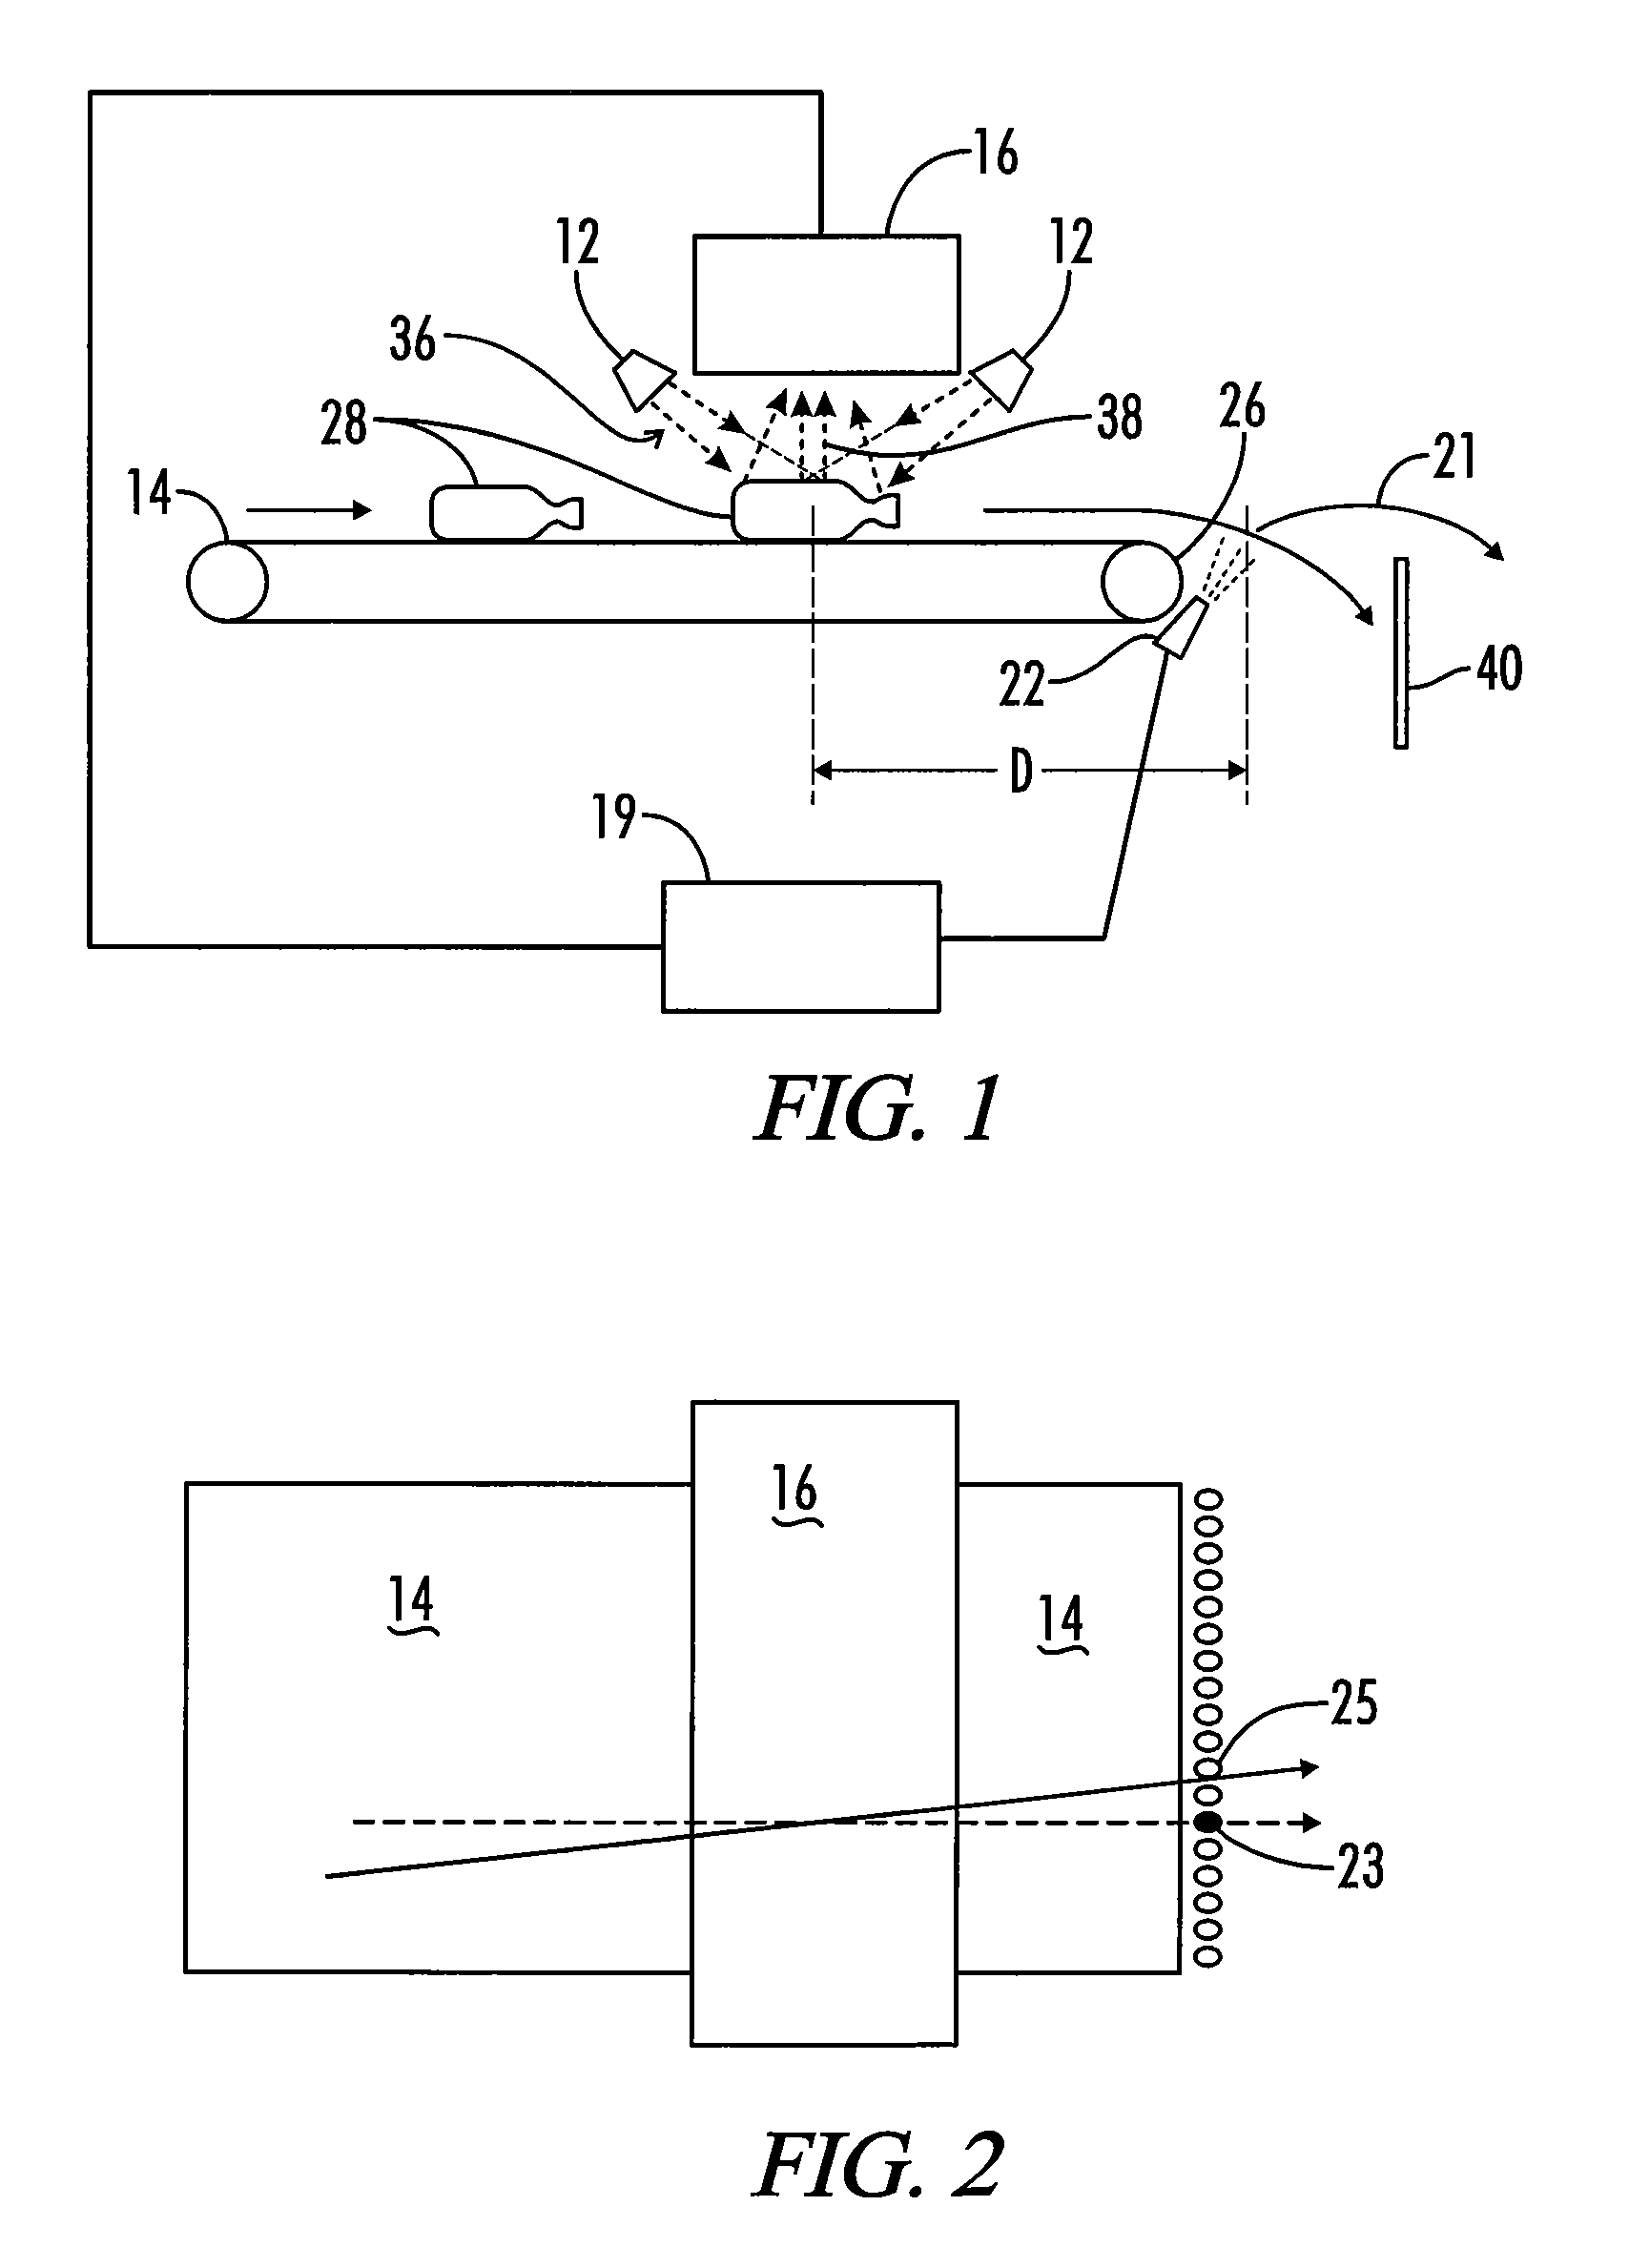 Method and apparatus for improving performance in container sorting